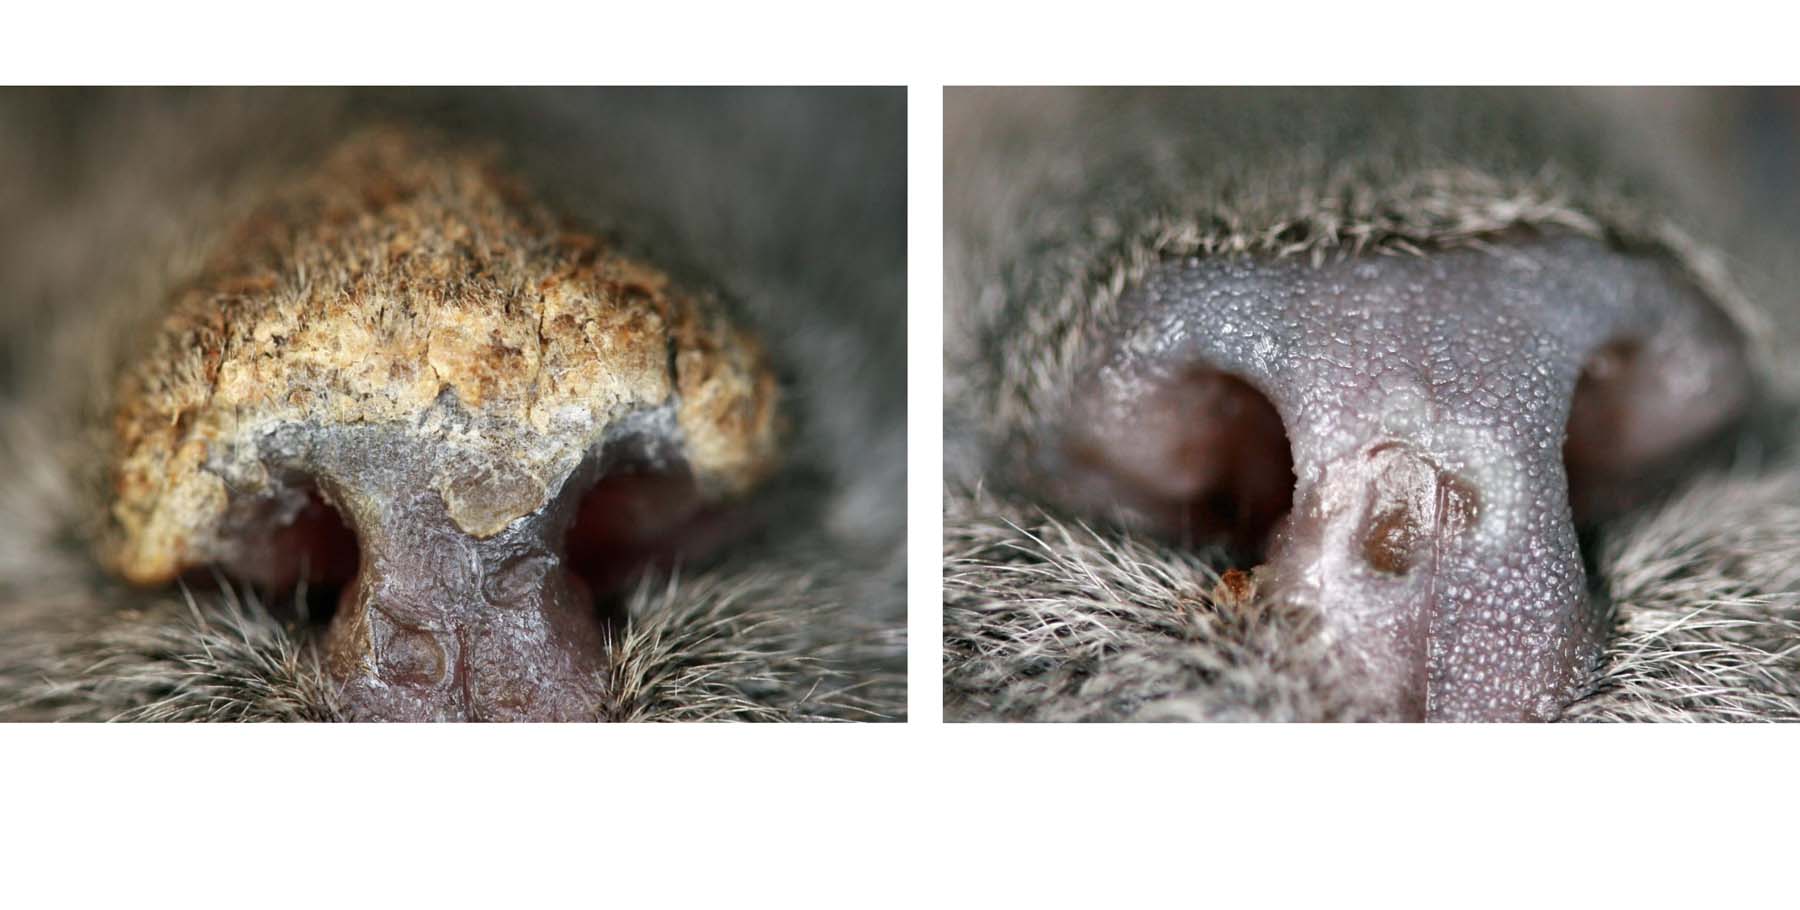 Feline Pemphigus Foliaceus: On immediate Diagnosis & after 6 weeks of Topical Treatment only, British Blue Cat